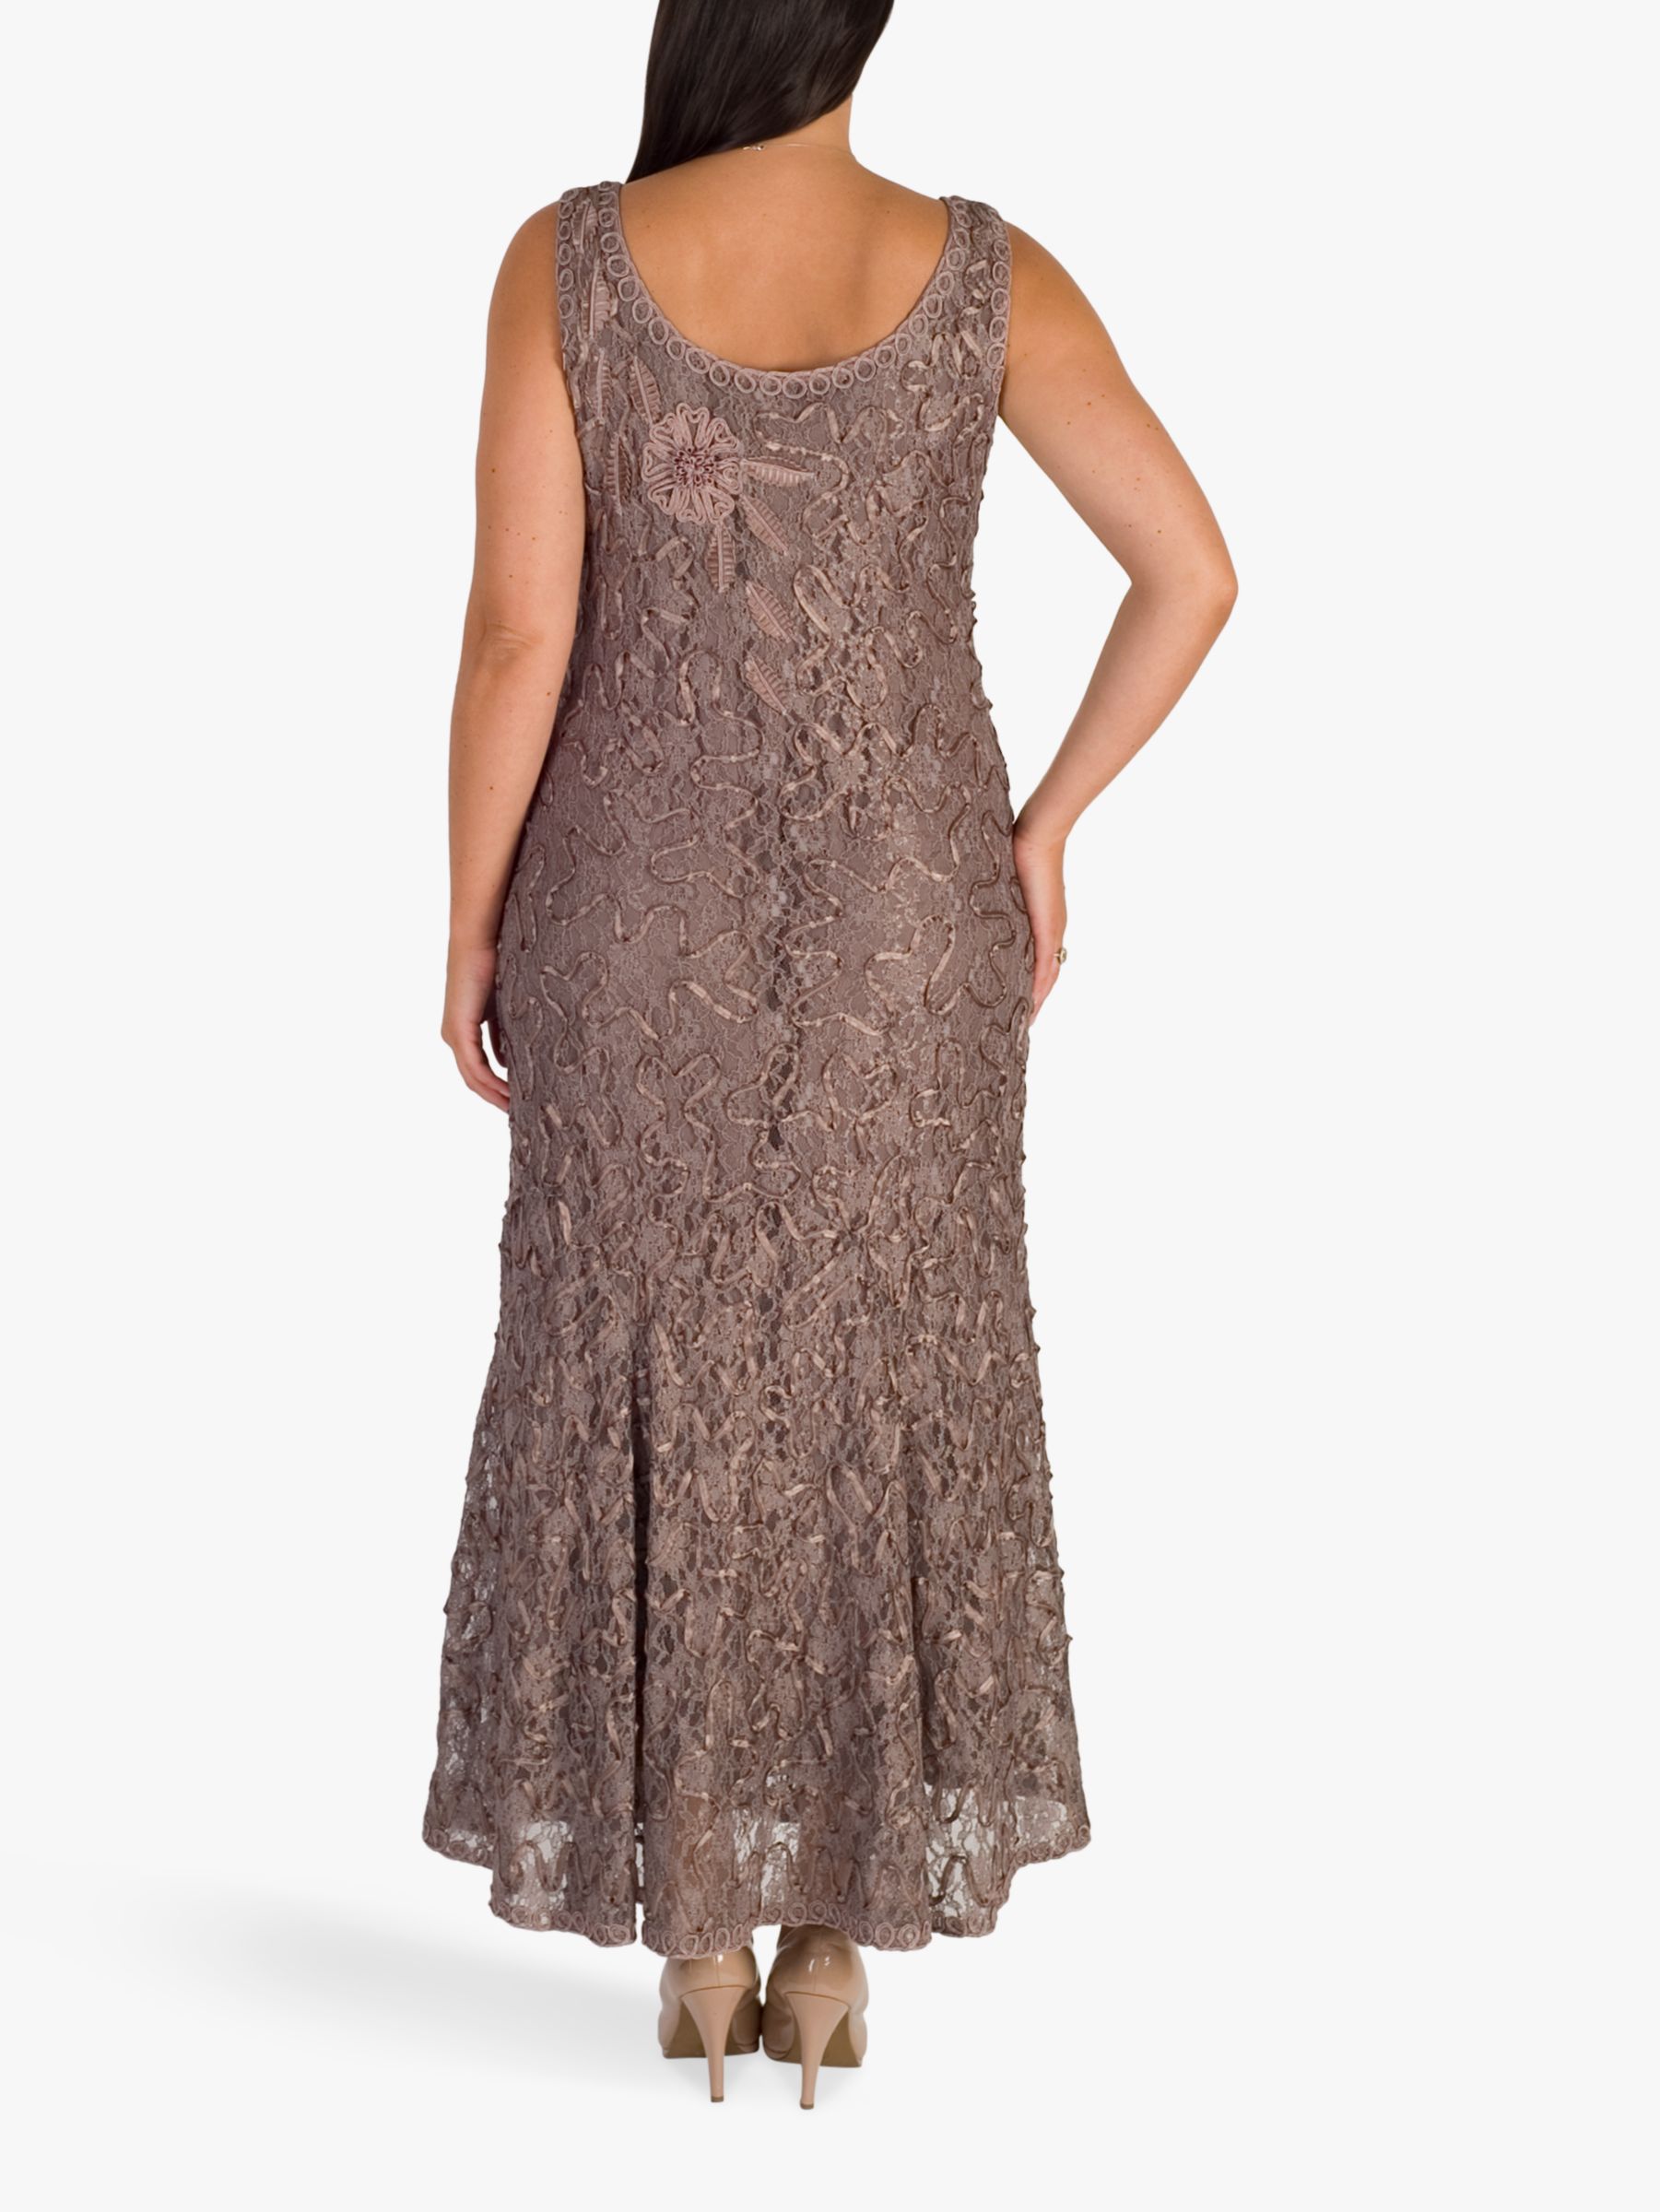 Chesca Lace Cornelli Embroidered Dress, Cappucino at John Lewis & Partners